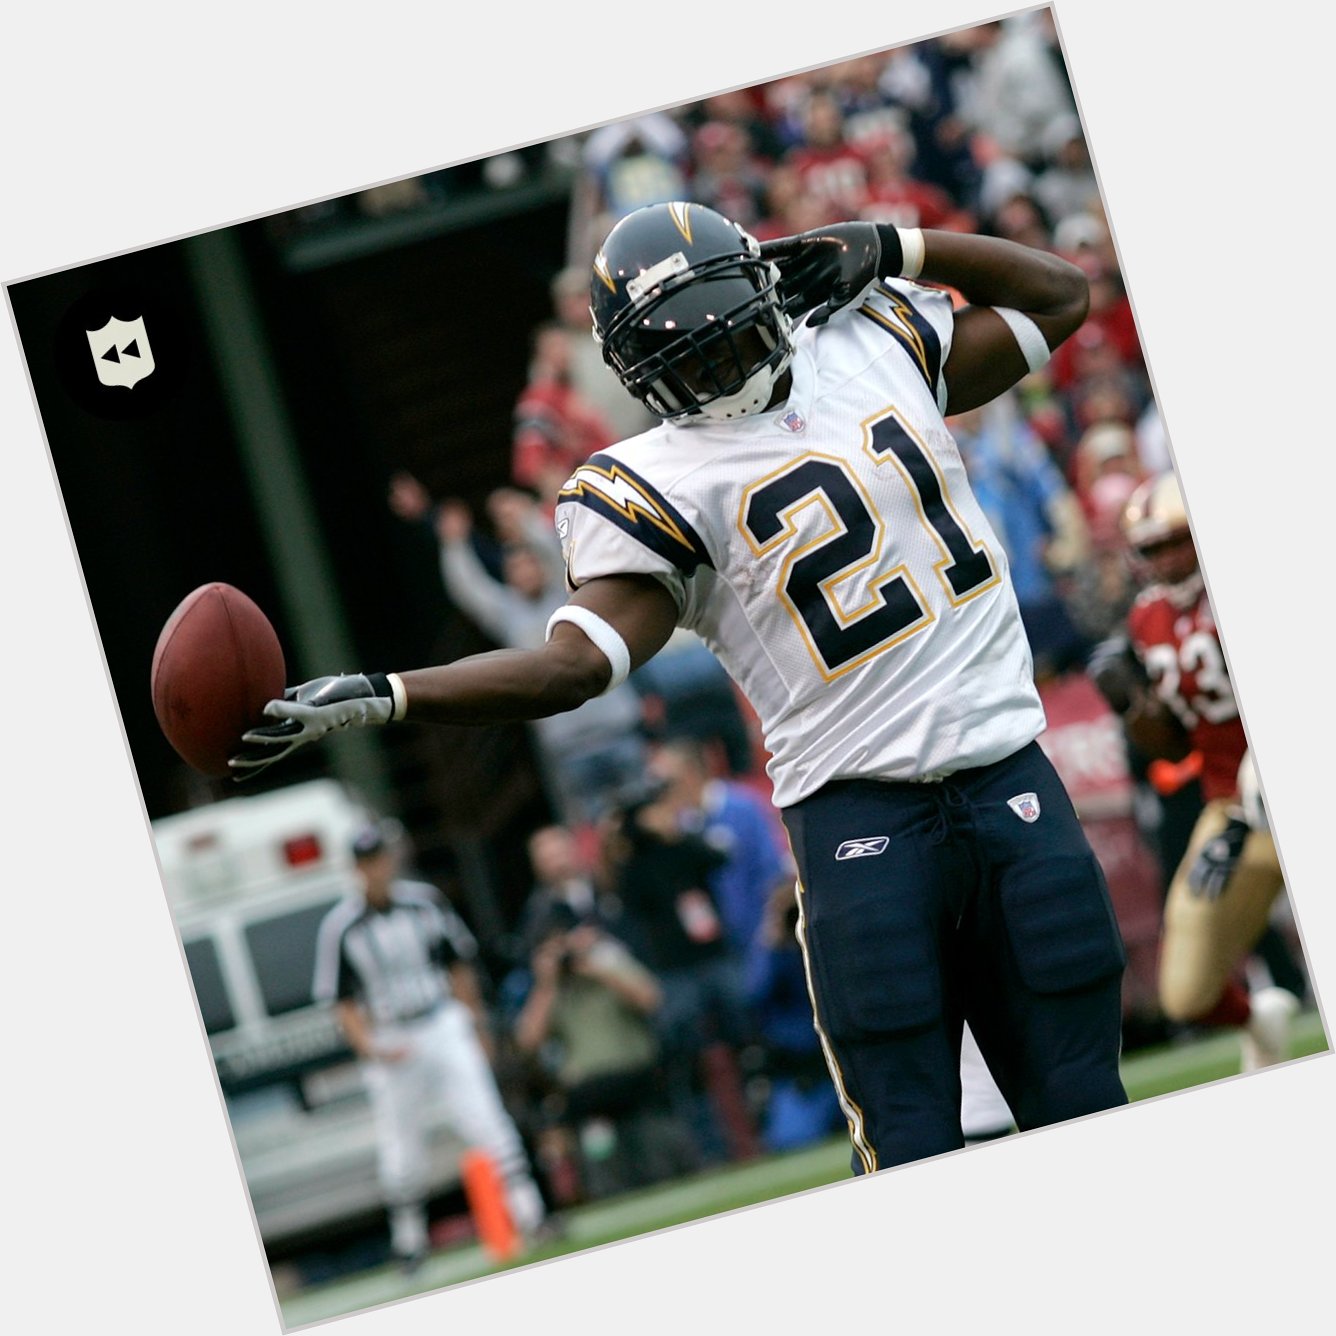 Happy birthday to LaDainian Tomlinson. One of the best to ever do it.  